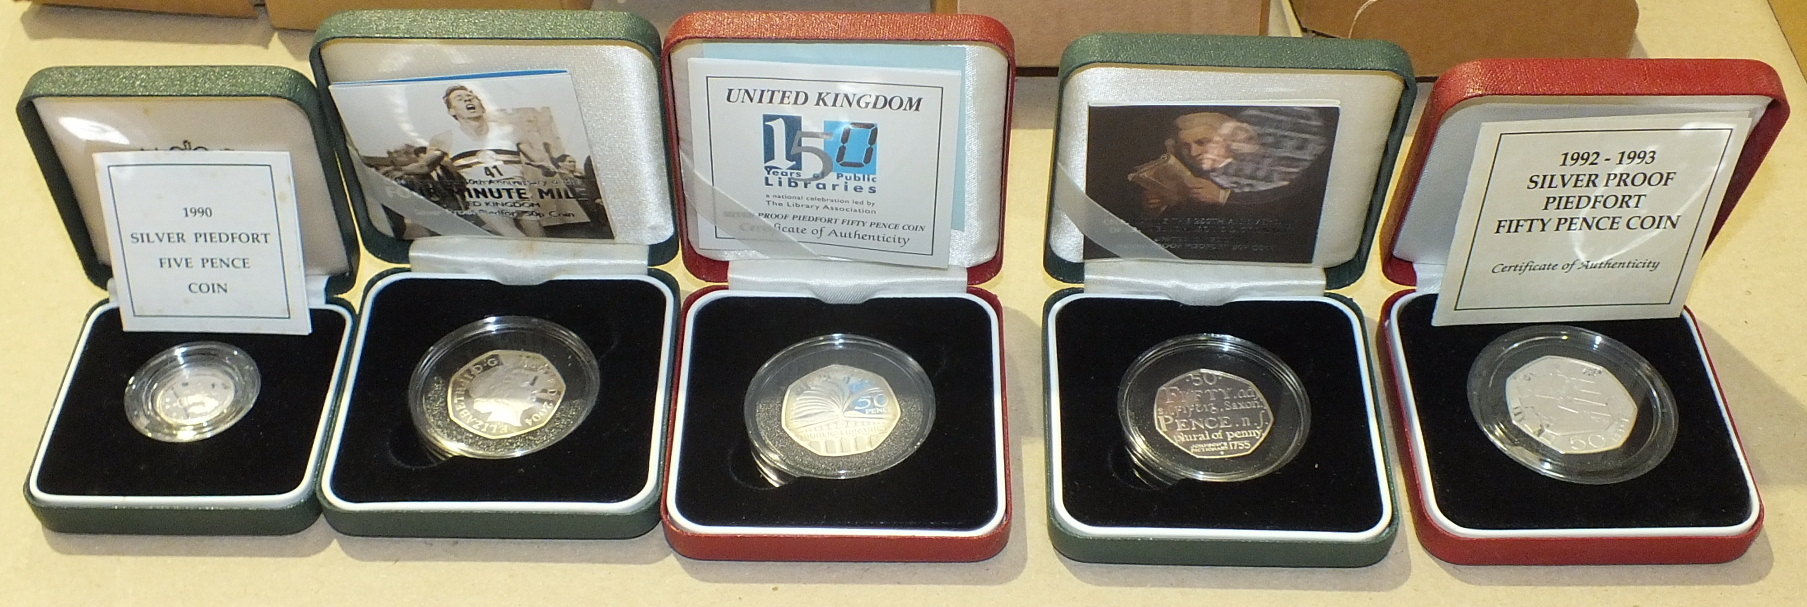 A collection of Royal Mint cased Piedfort silver proof coins, comprising: 50 pence 1992-93 (one